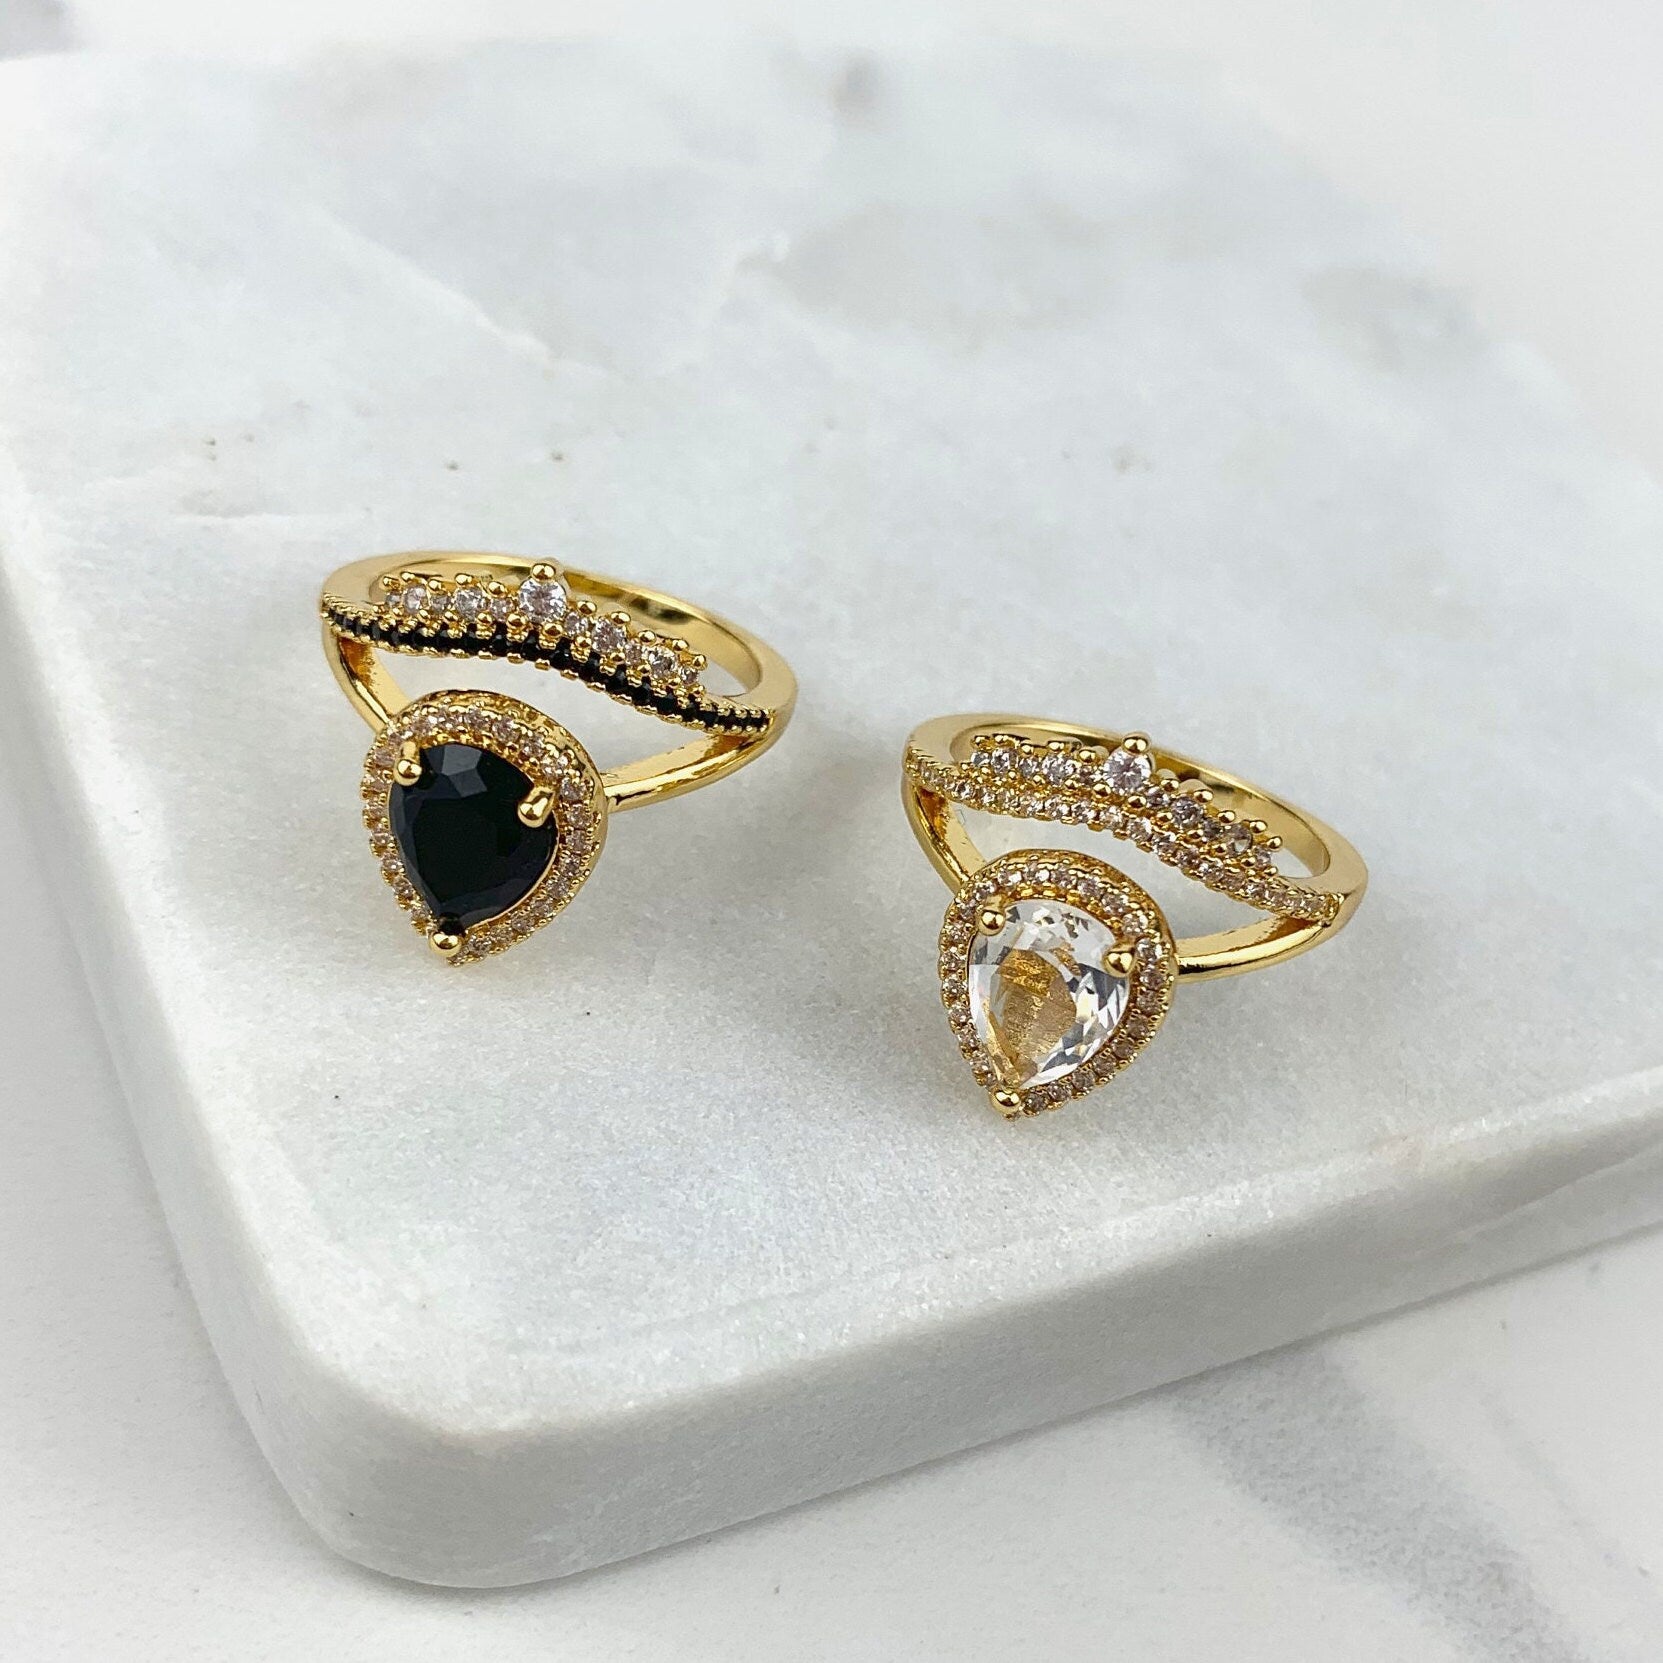 18k Gold Filled Cubic Zirconia Crown and Teardrop Ring, White or Black, Wholesale Jewelry Making Supplies